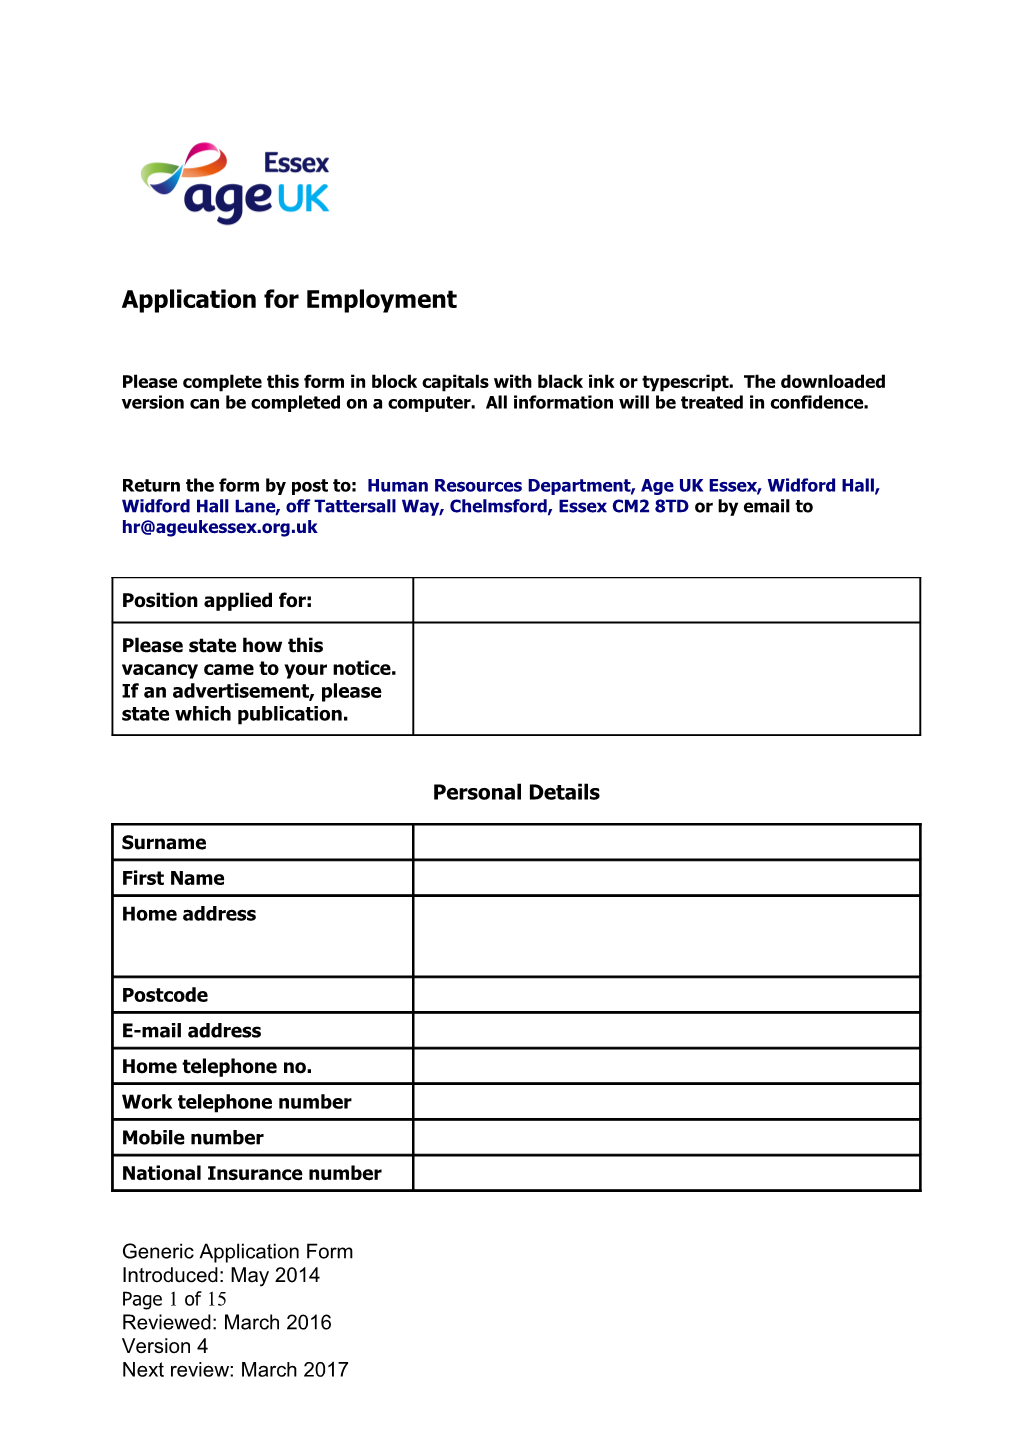 Application for Employment s58